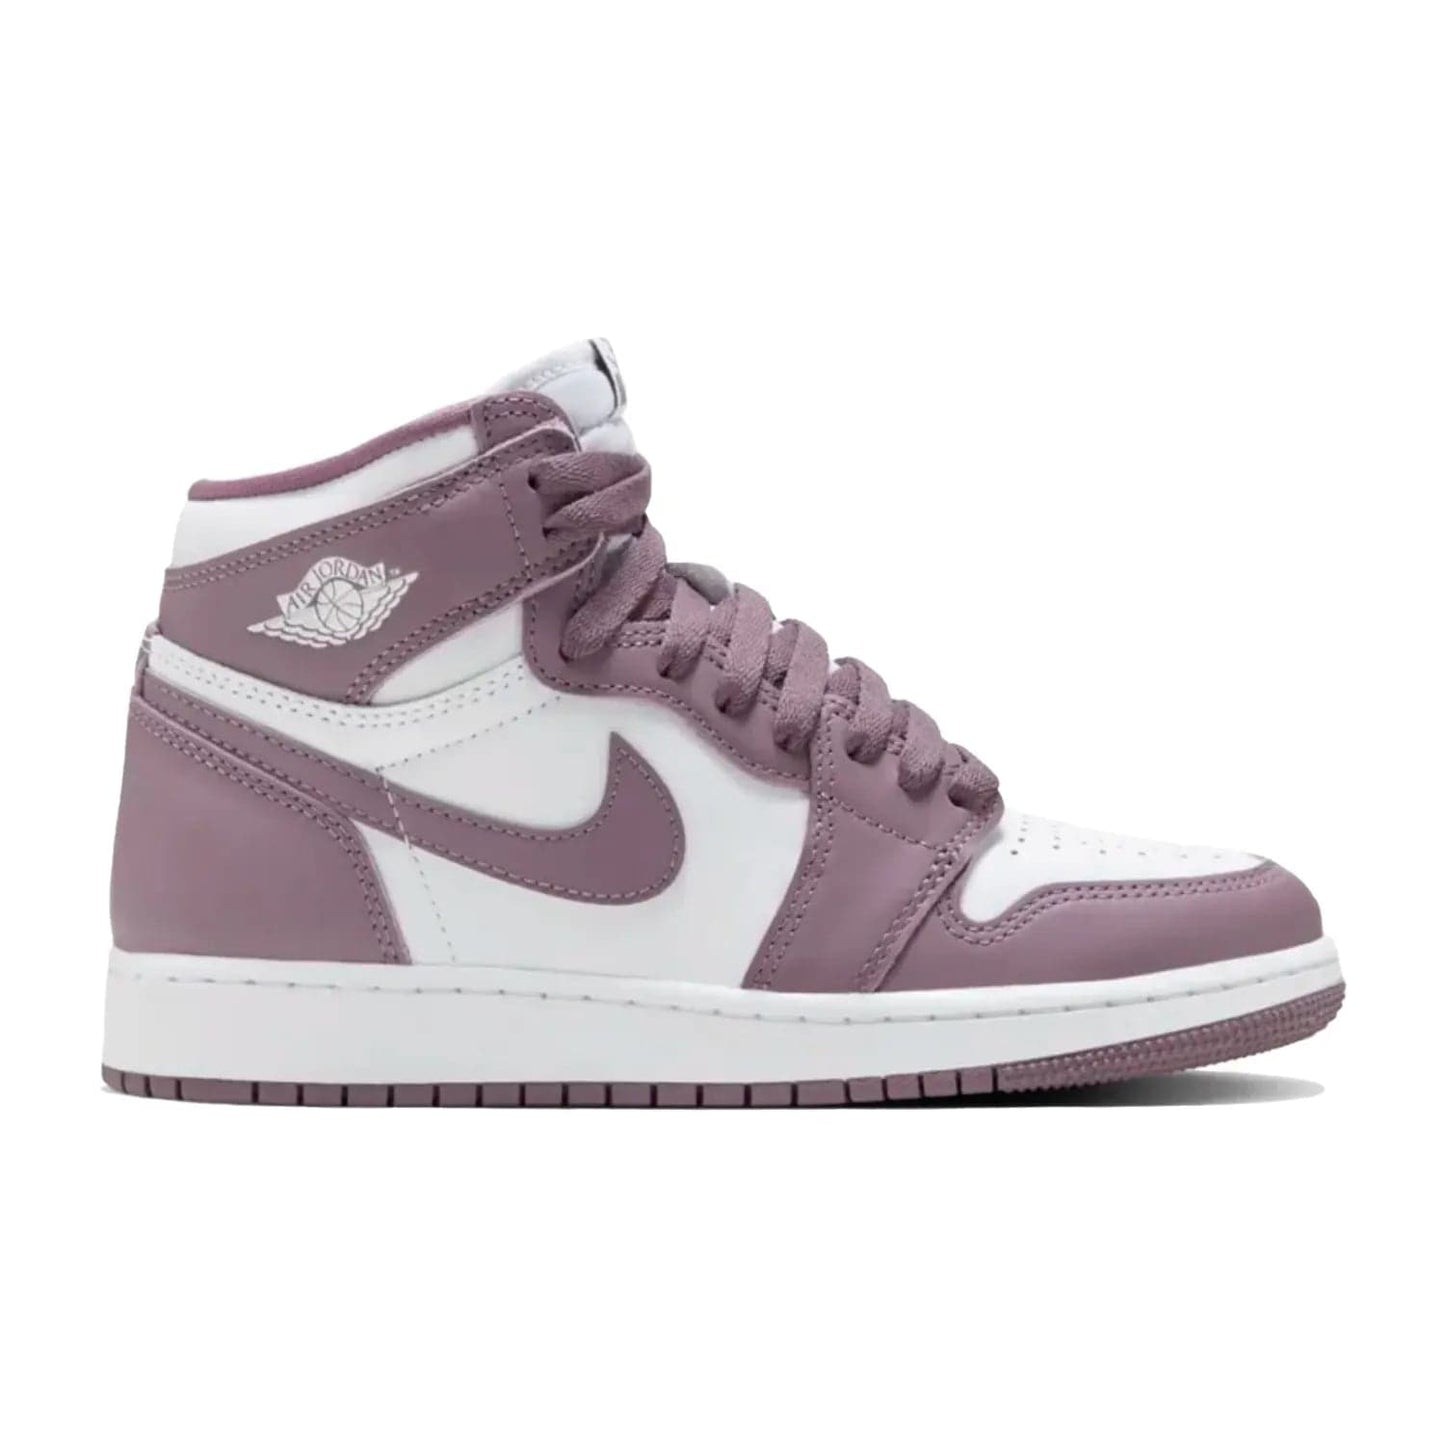 Jordan 1 Retro High OG Mauve (GS) - Image 1 - Only at www.BallersClubKickz.com - The Jordan 1 Retro High OG Mauve adds stylish Sky J Mauve accents and an OG shape to an all-white upper. Get noticed in this iconic silhouette when it drops October 14th, 2023.